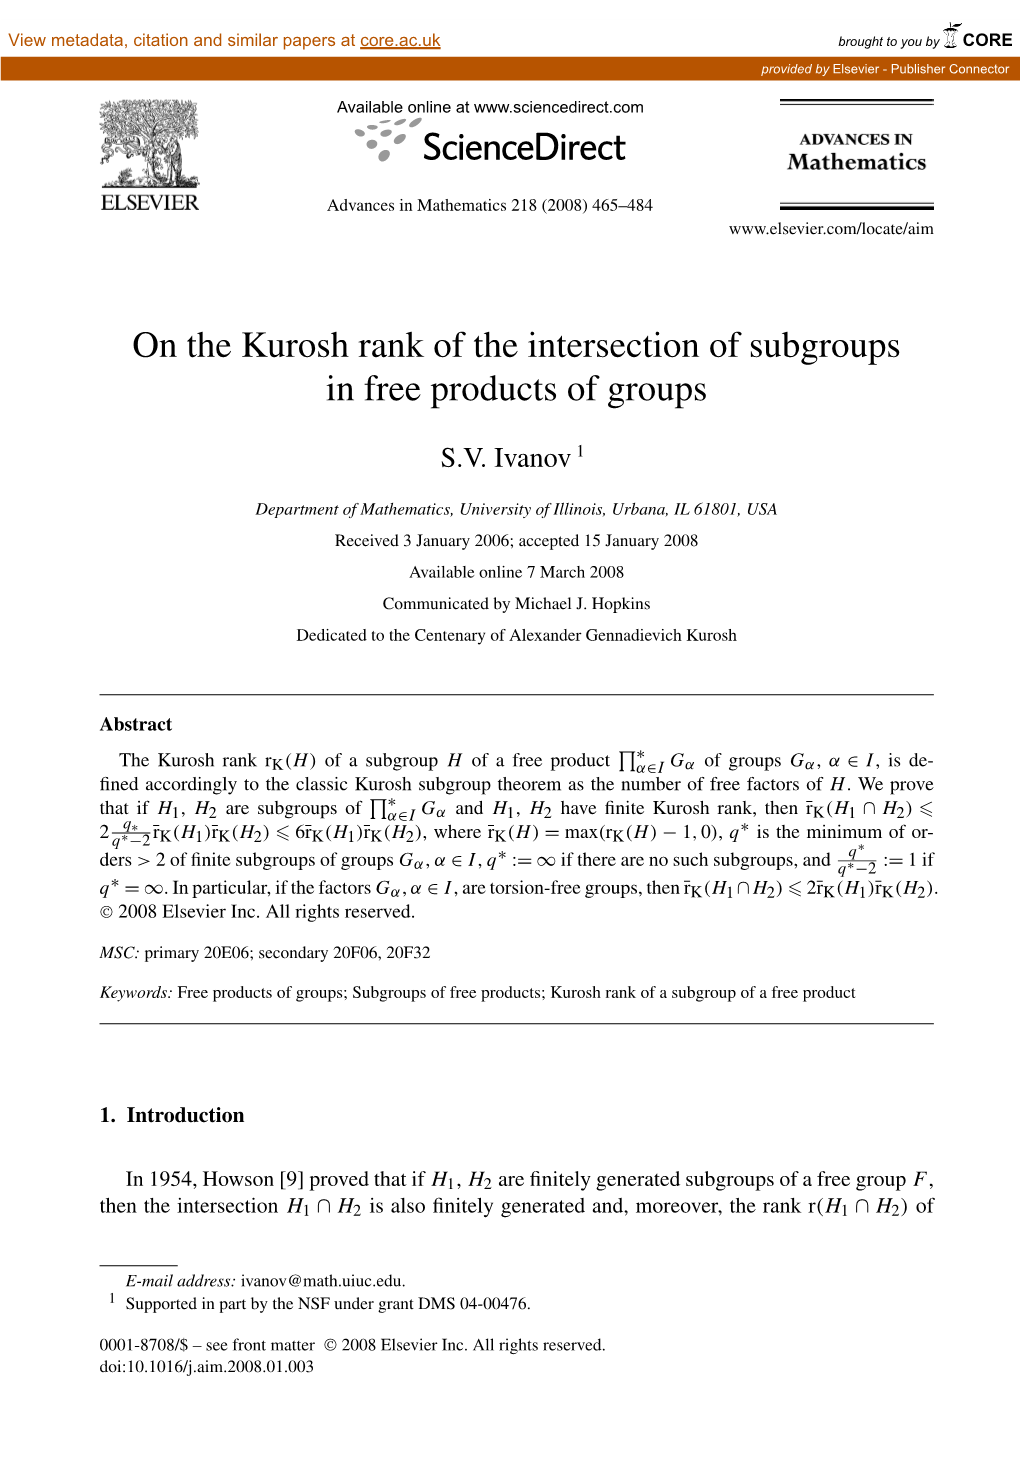 On the Kurosh Rank of the Intersection of Subgroups in Free Products of Groups